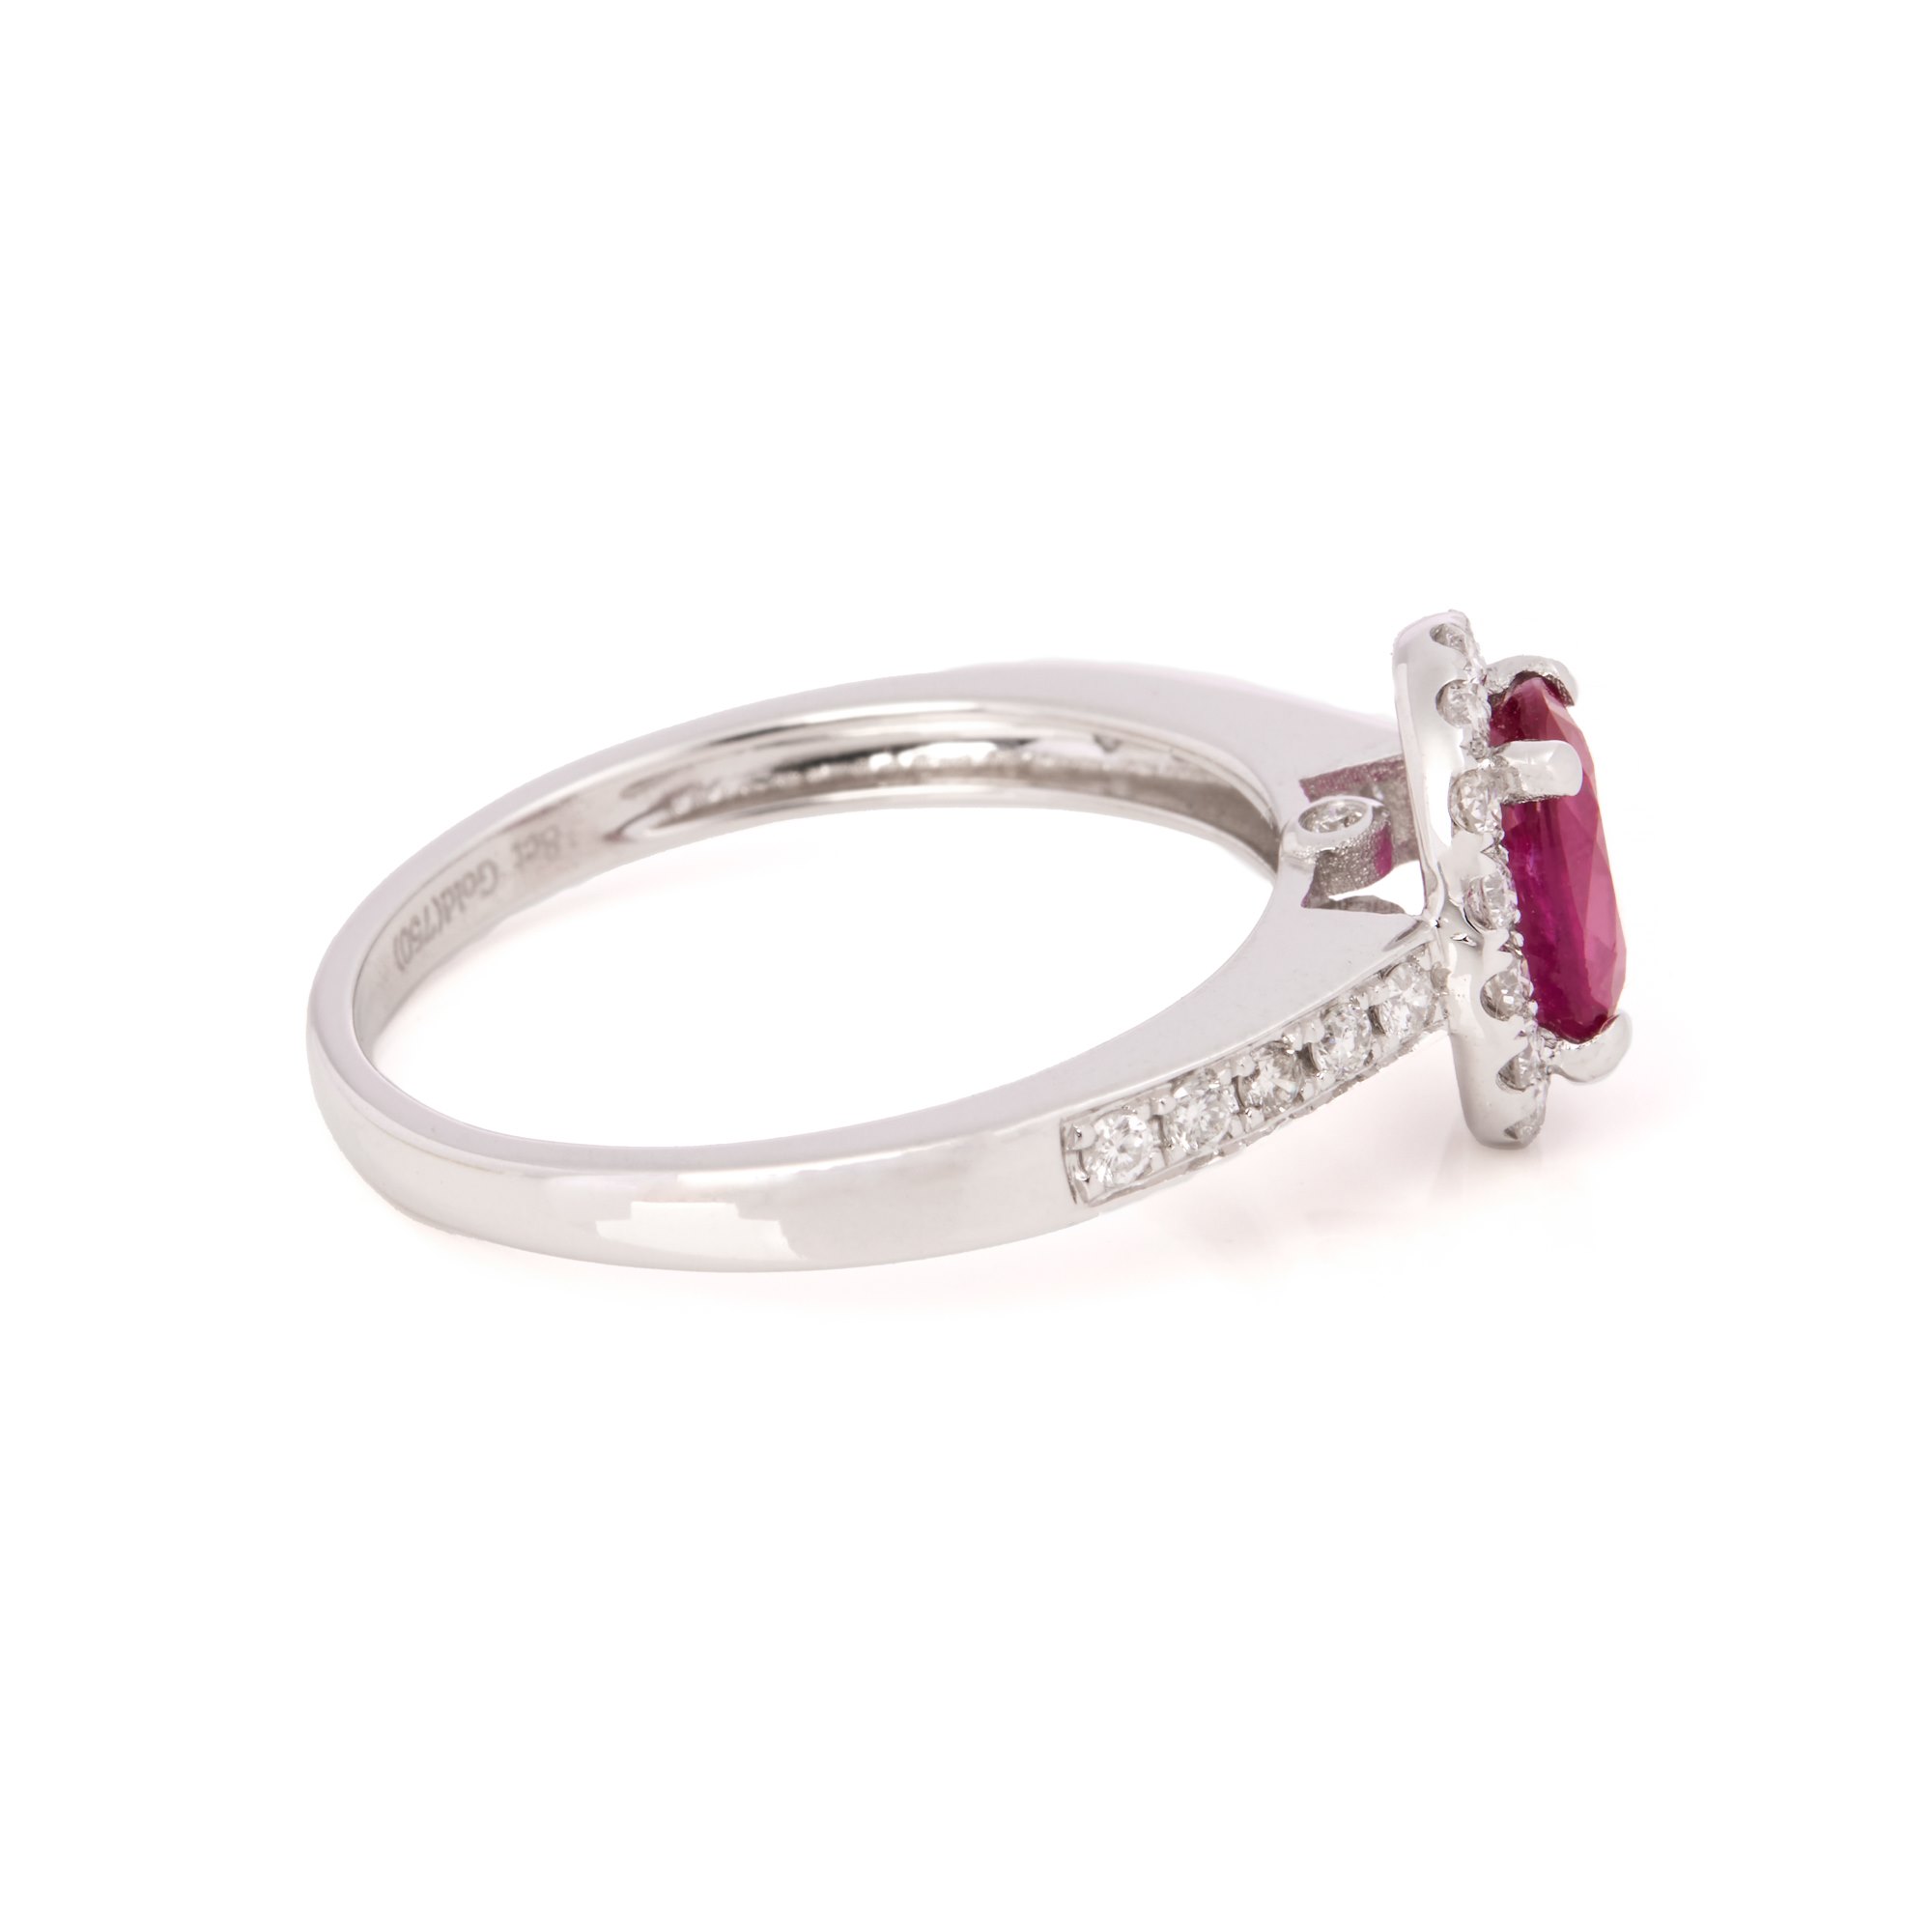 David Jerome Certified 1.17ct Oval Cut Ruby and Diamond Ring